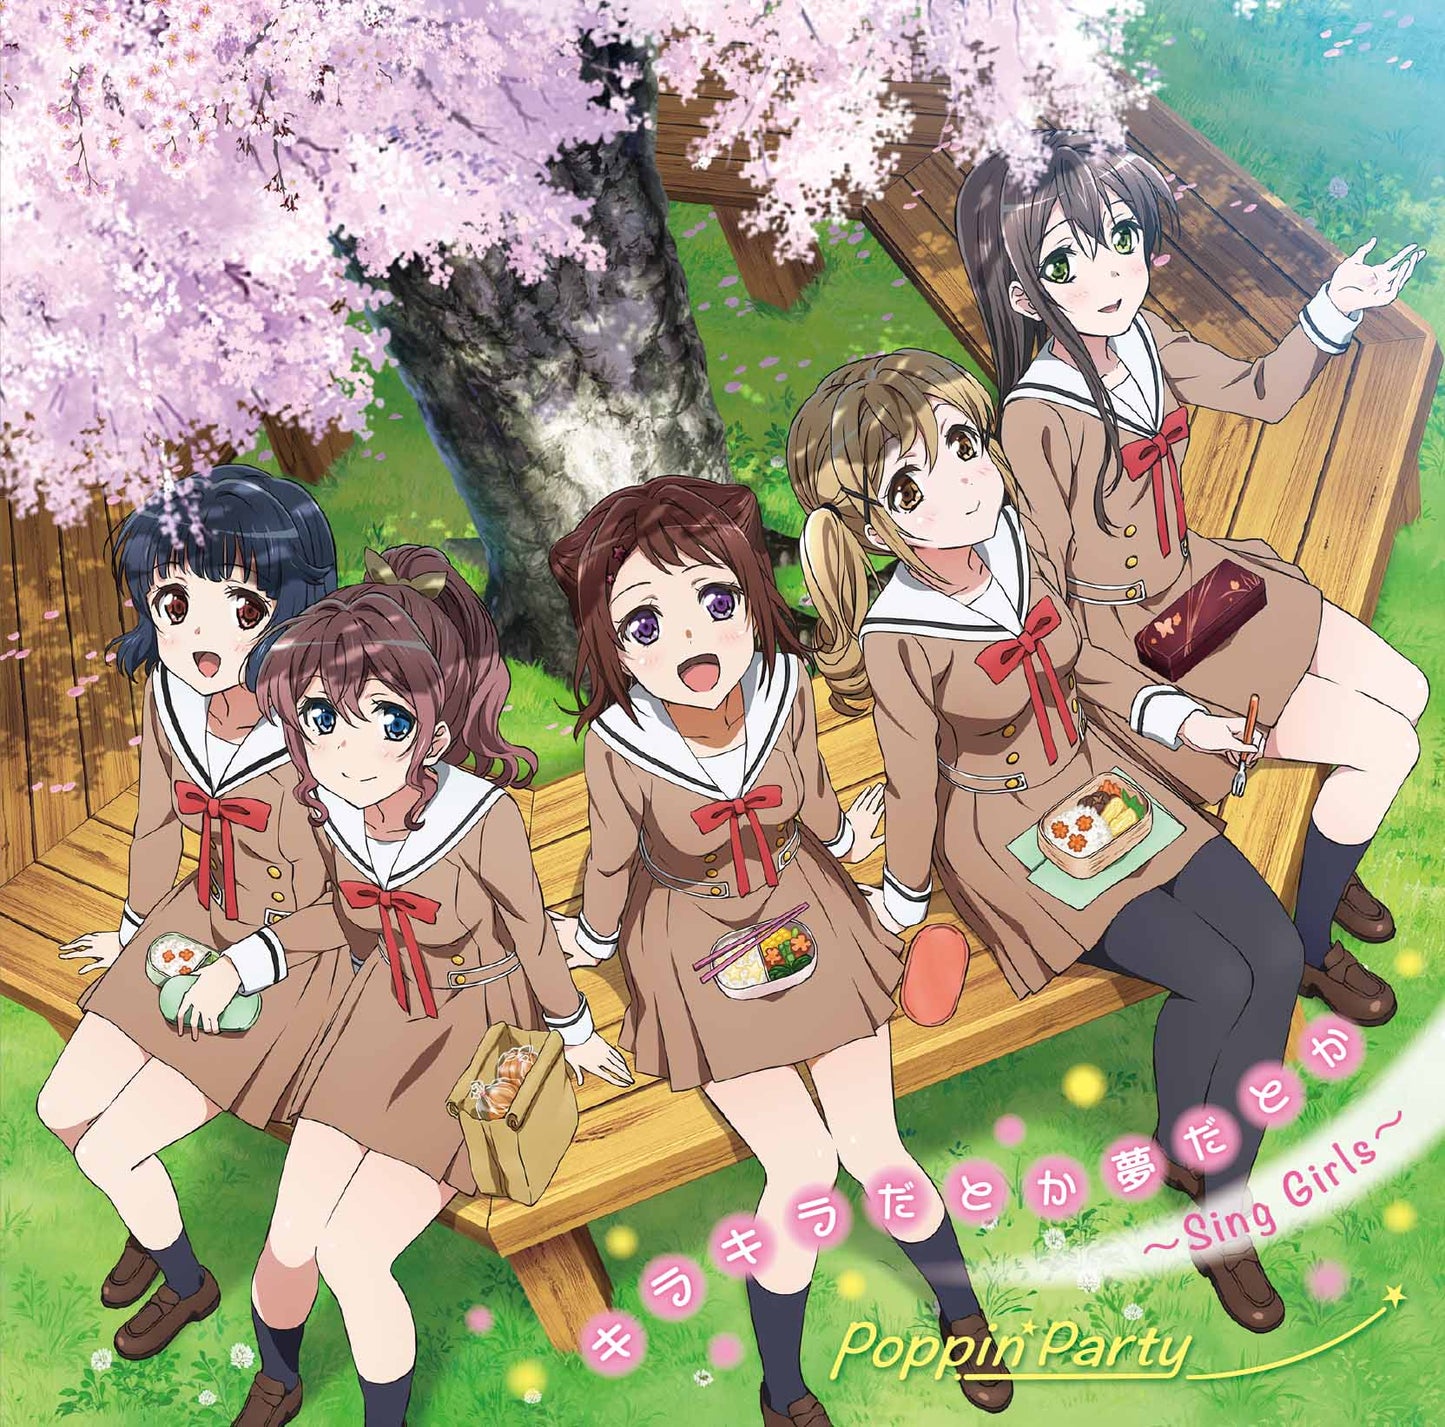 Poppin'Party 5th Single "Sparkling Dreaming ~ Sing Girls ~"